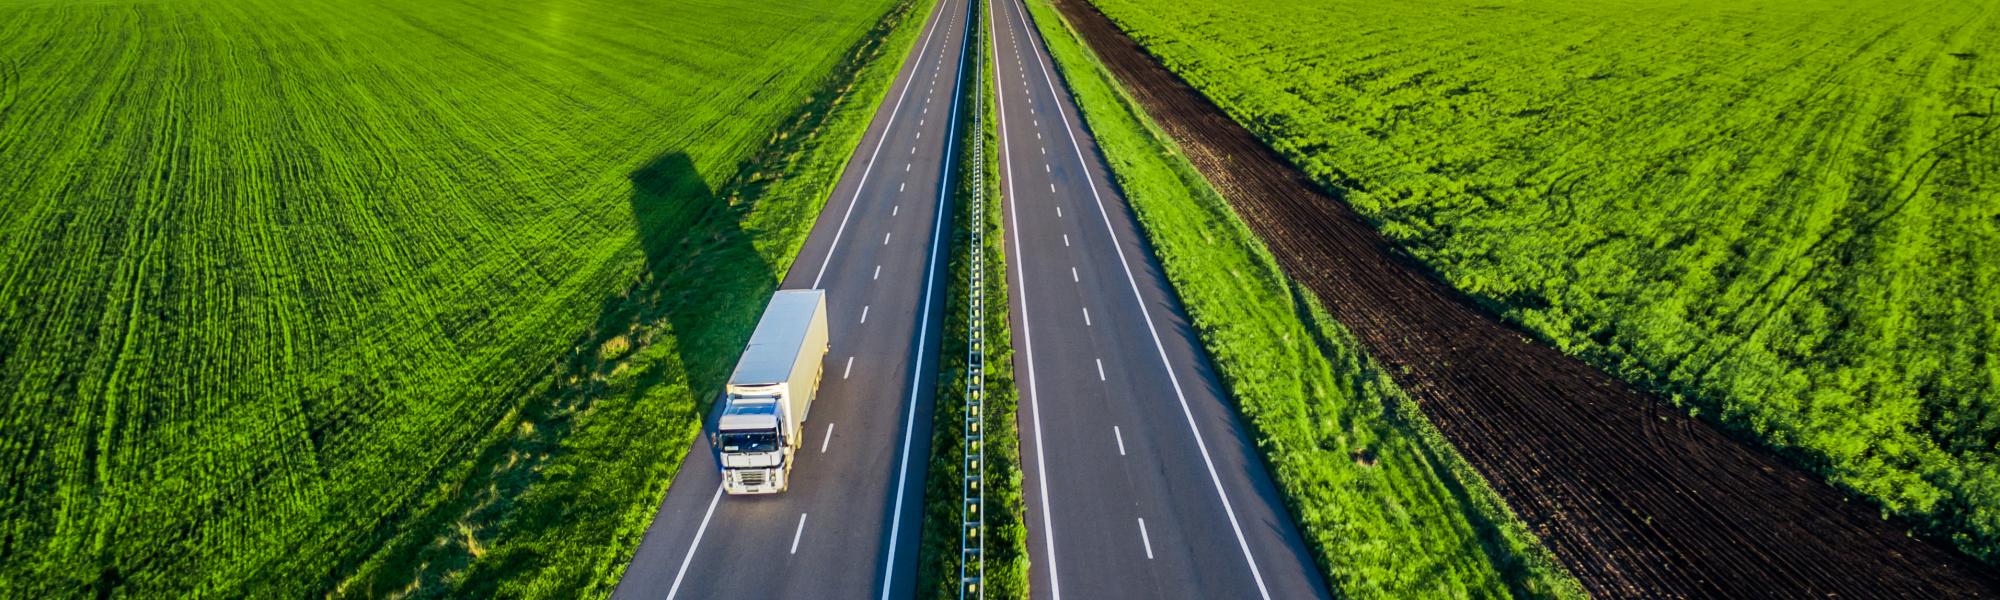 Success of truck CO2 standards relies on commercial viability of technology